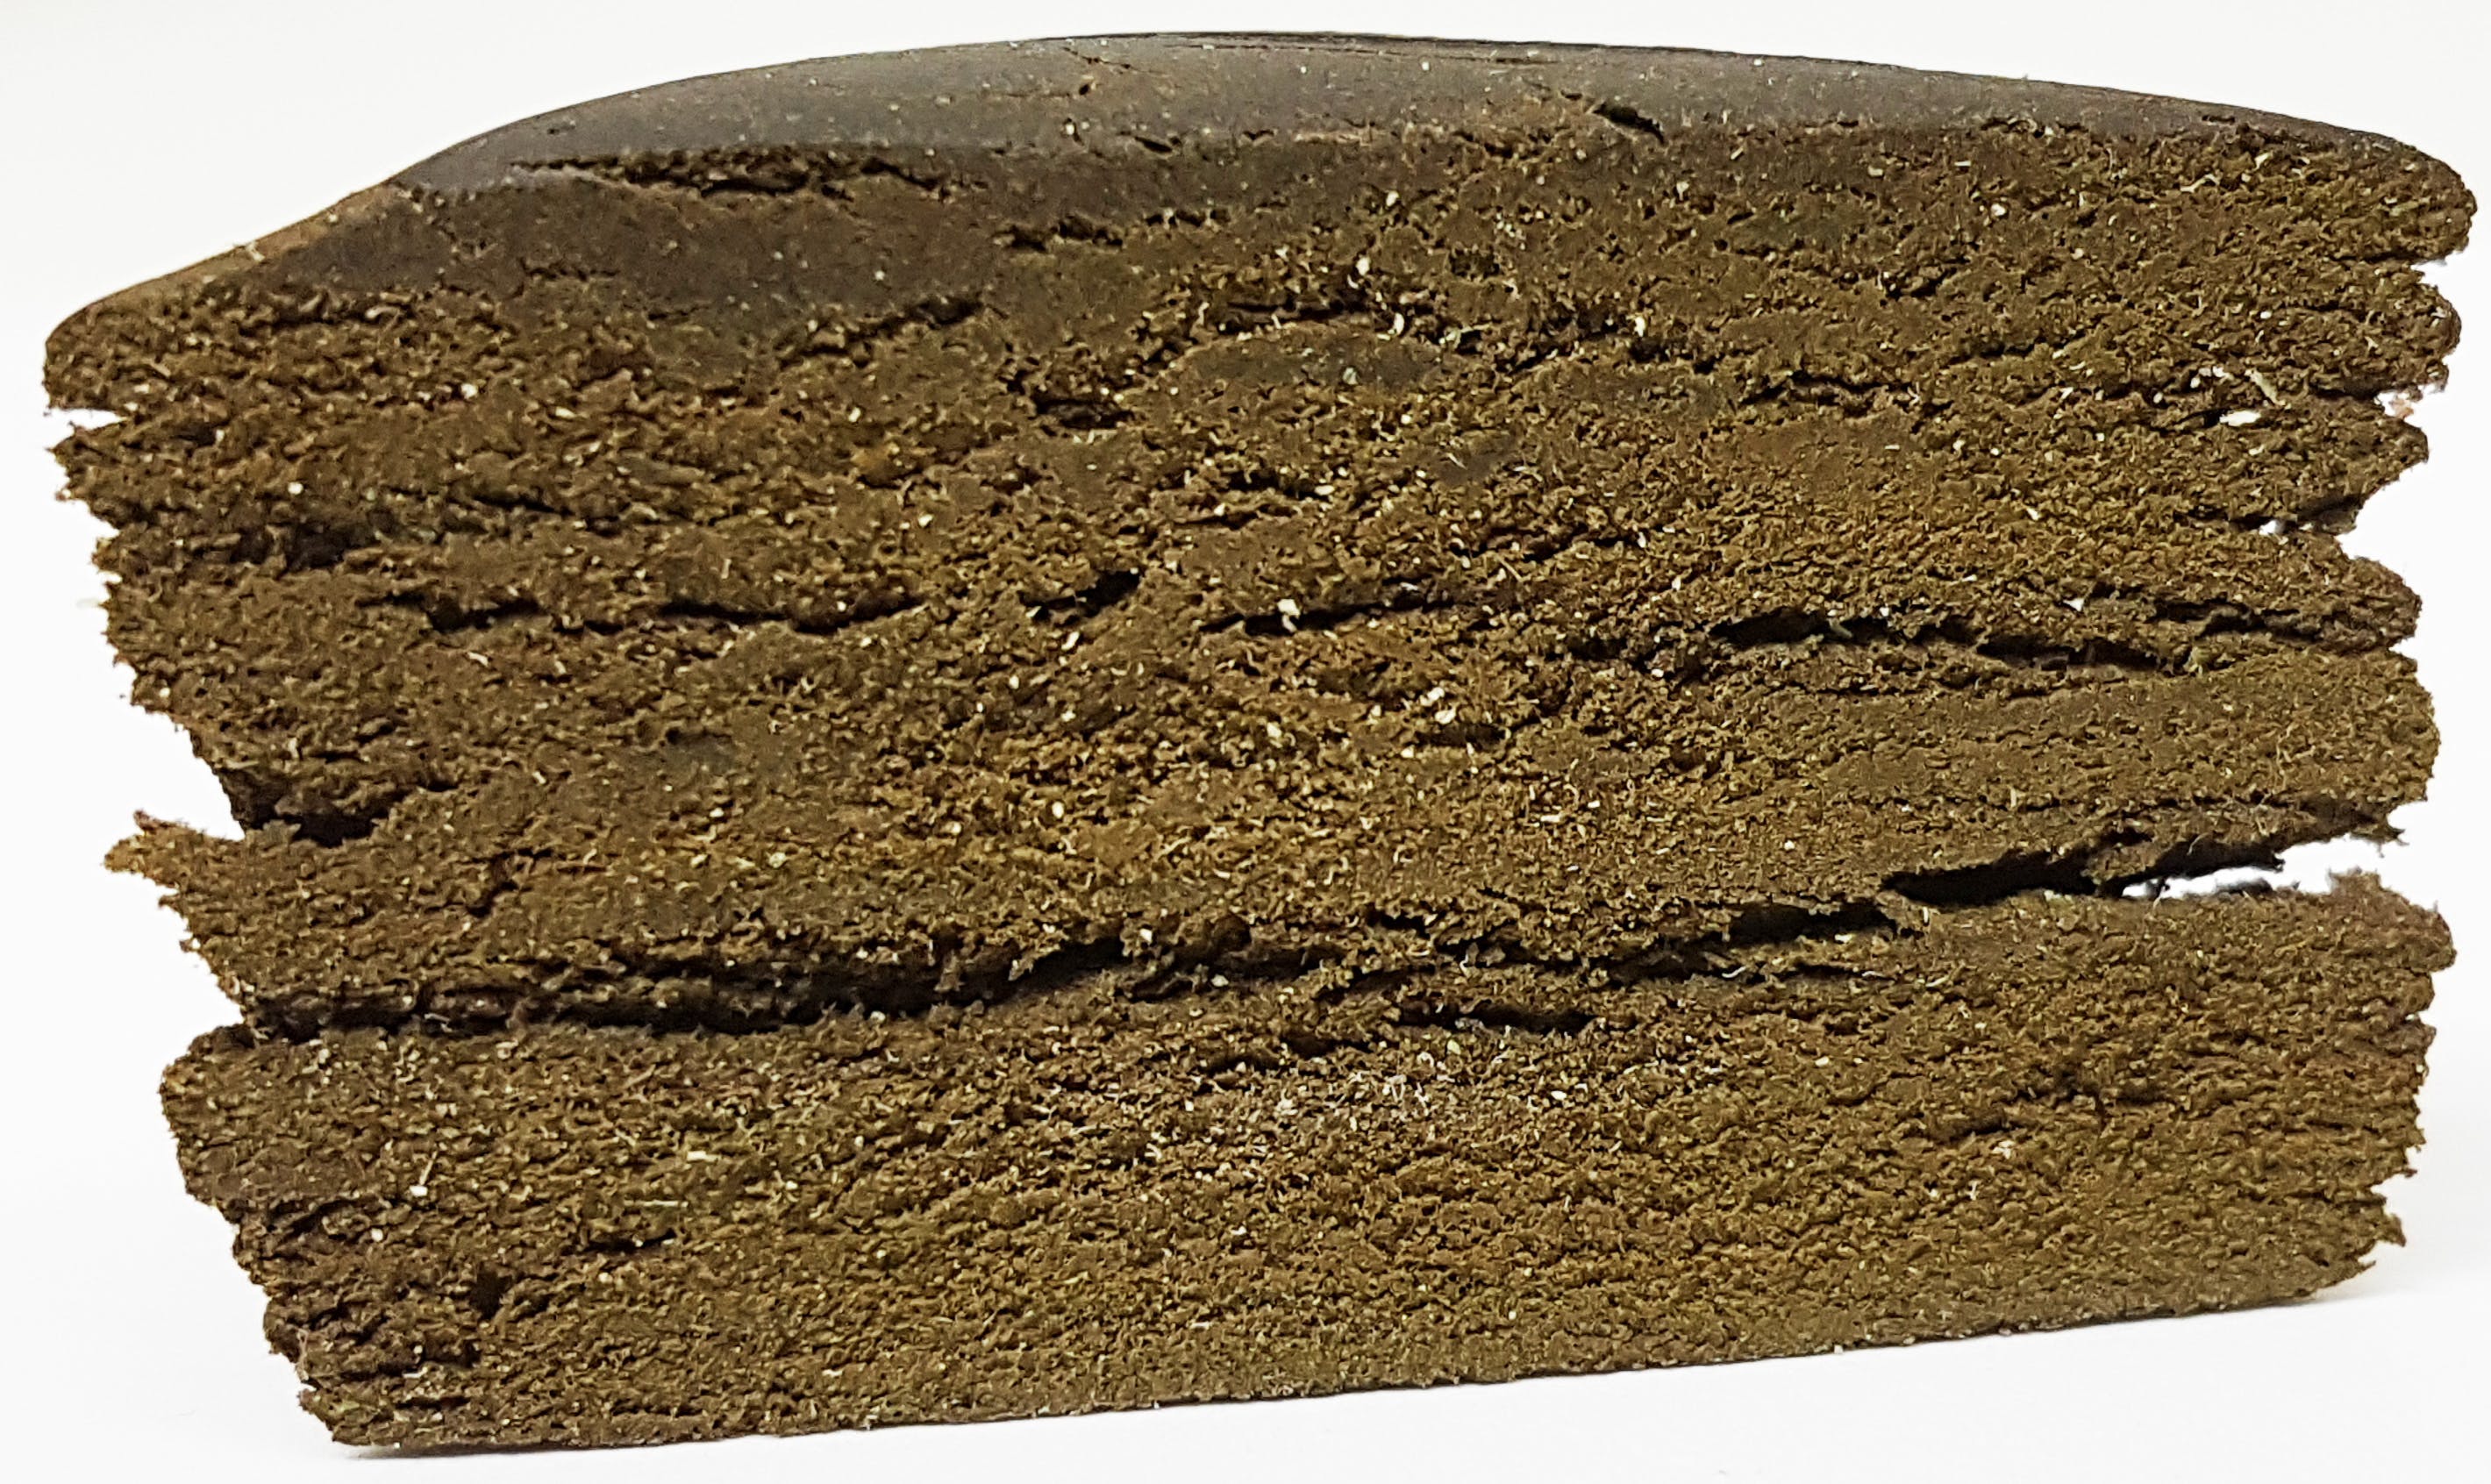 concentrate-out-of-stock-top-shelf-afghan-hashish-1g-for-12-2c-2g-for-20-2c-or-6g-for-50-21-21-21